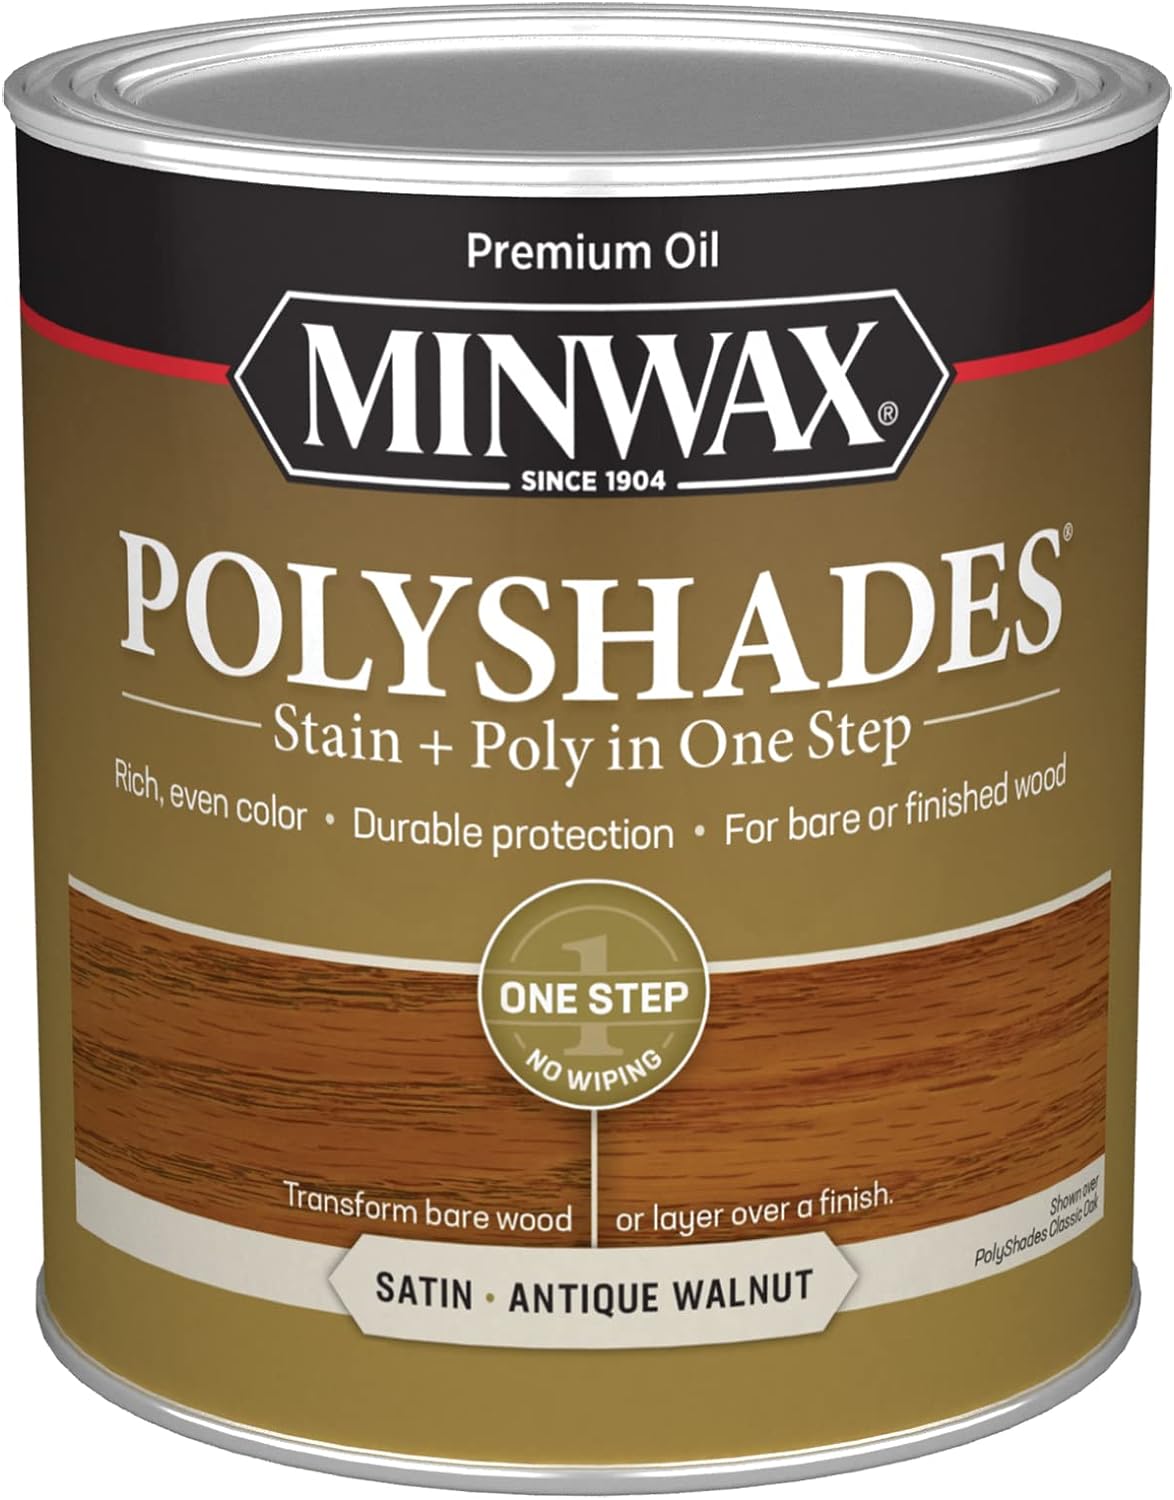 How to Apply Minwax Polyurethane for Beautiful Wood Finishes: A Step-by-Step Guide for Stunning Results